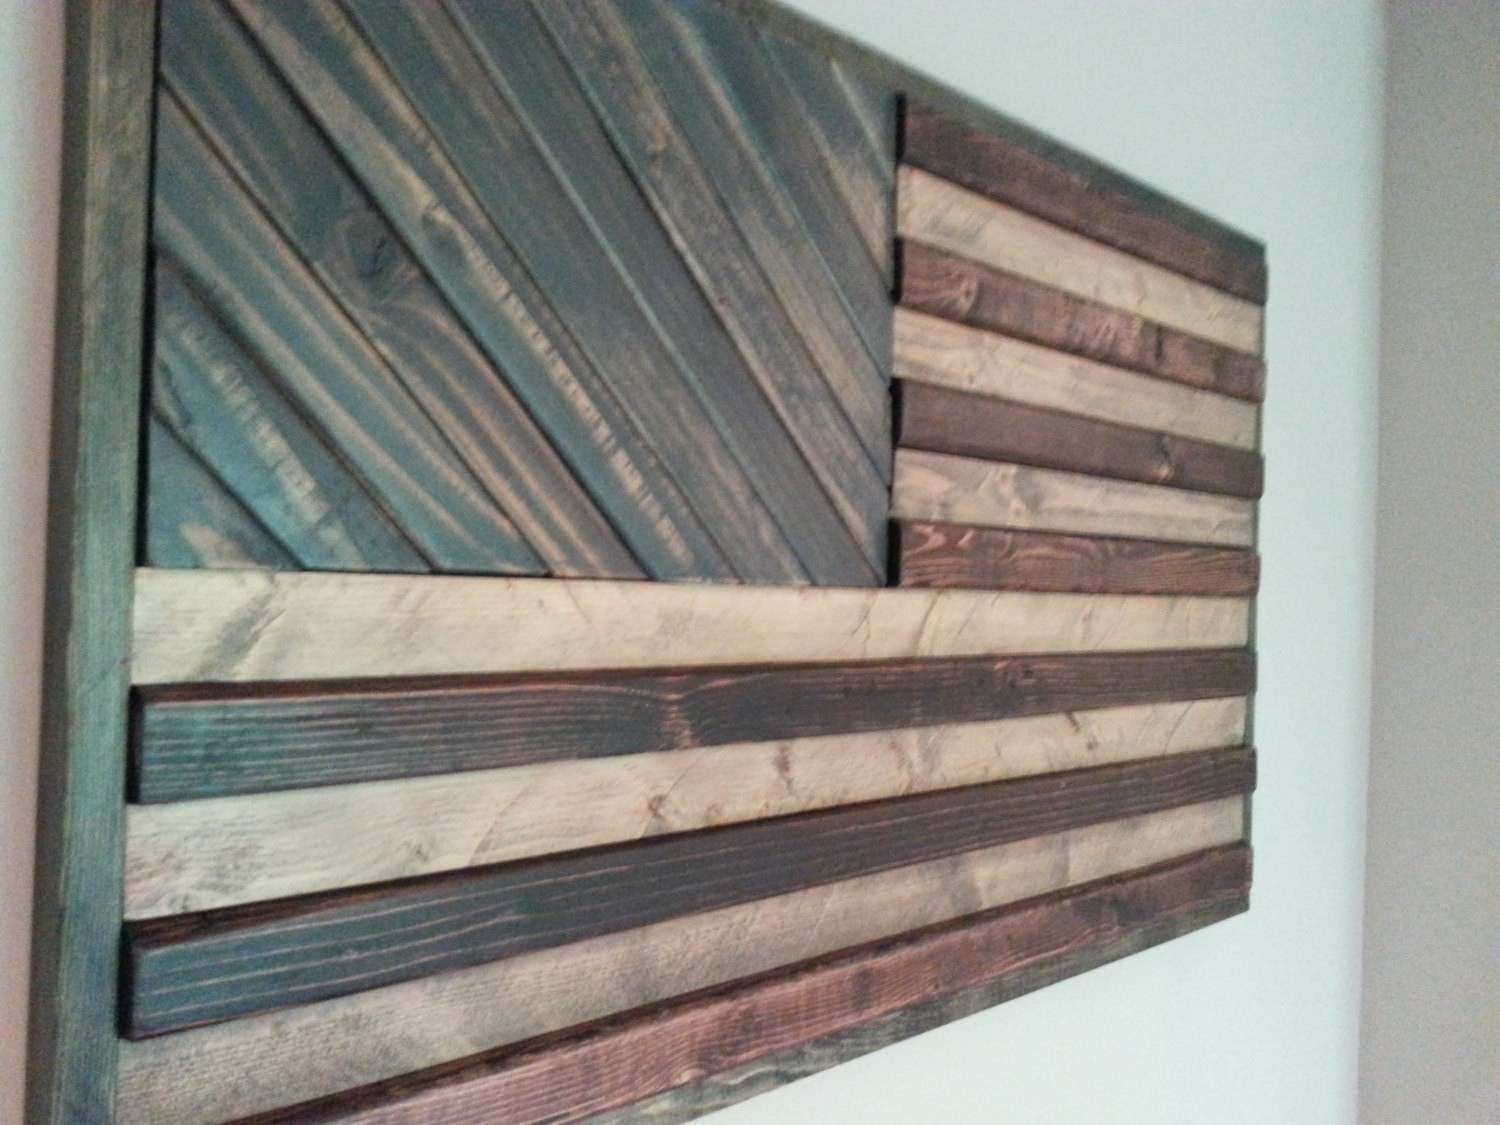 Rustic Wood Wall Art Best Of Cool Wood Wall Art Diy Rustic Wooden Regarding Diy Wood Wall Art (View 16 of 20)